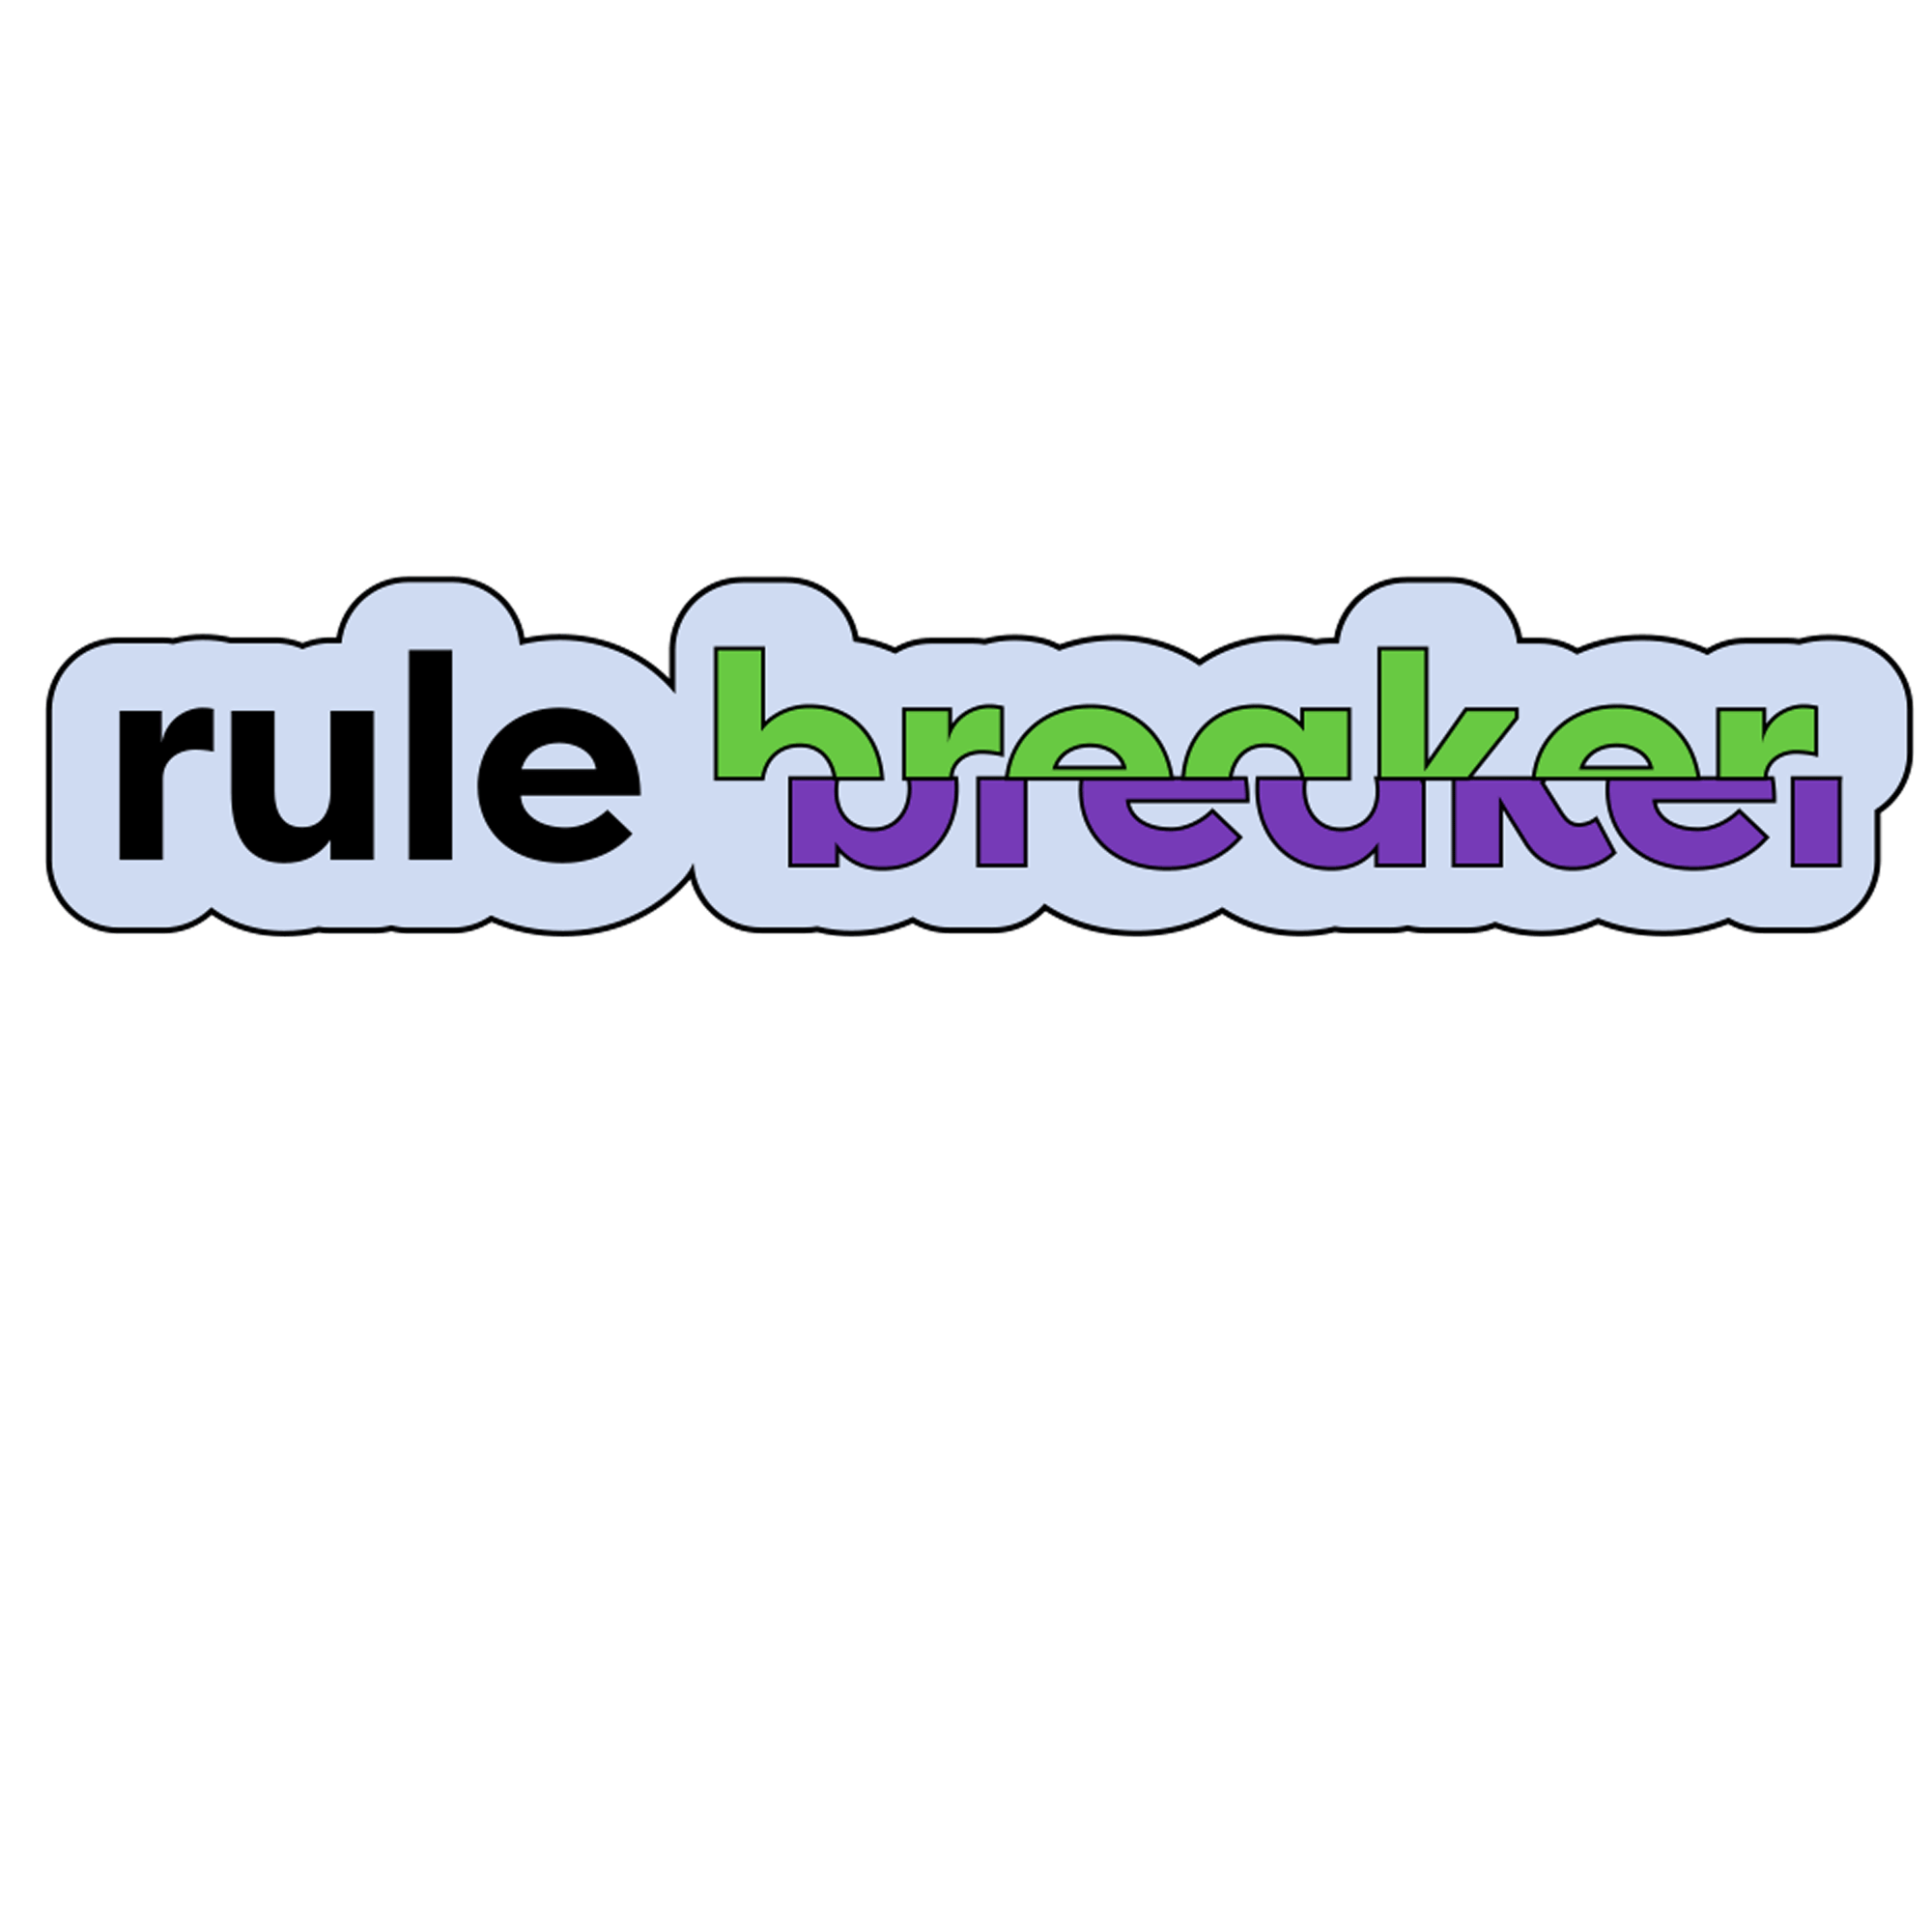 A moving image where the word "rulebreaker" is sliced in half